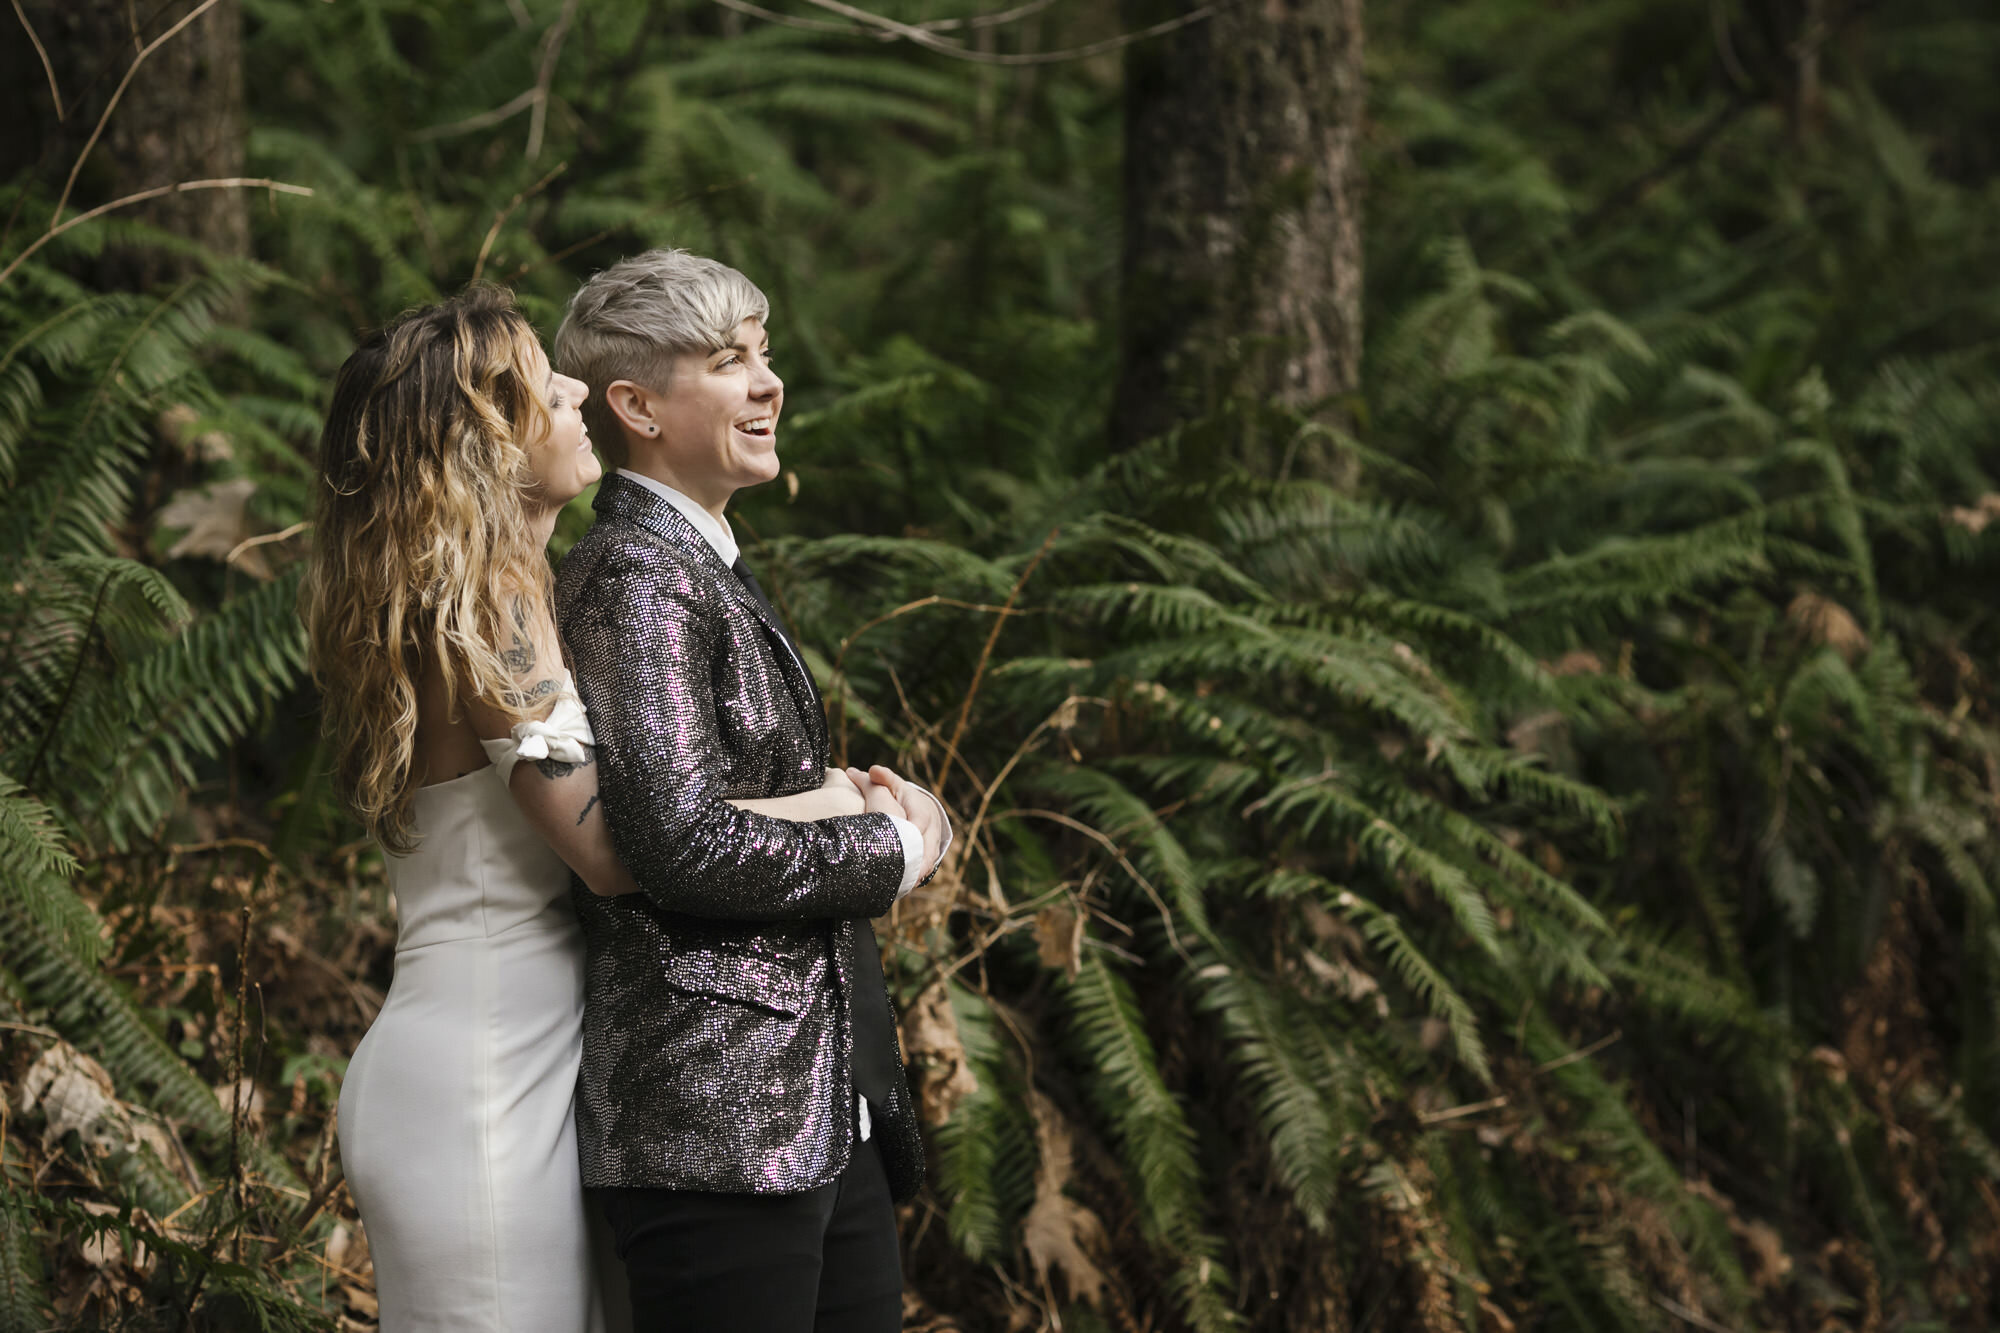 Wedding couple cuddle amongst the ferns in a forest in Washington